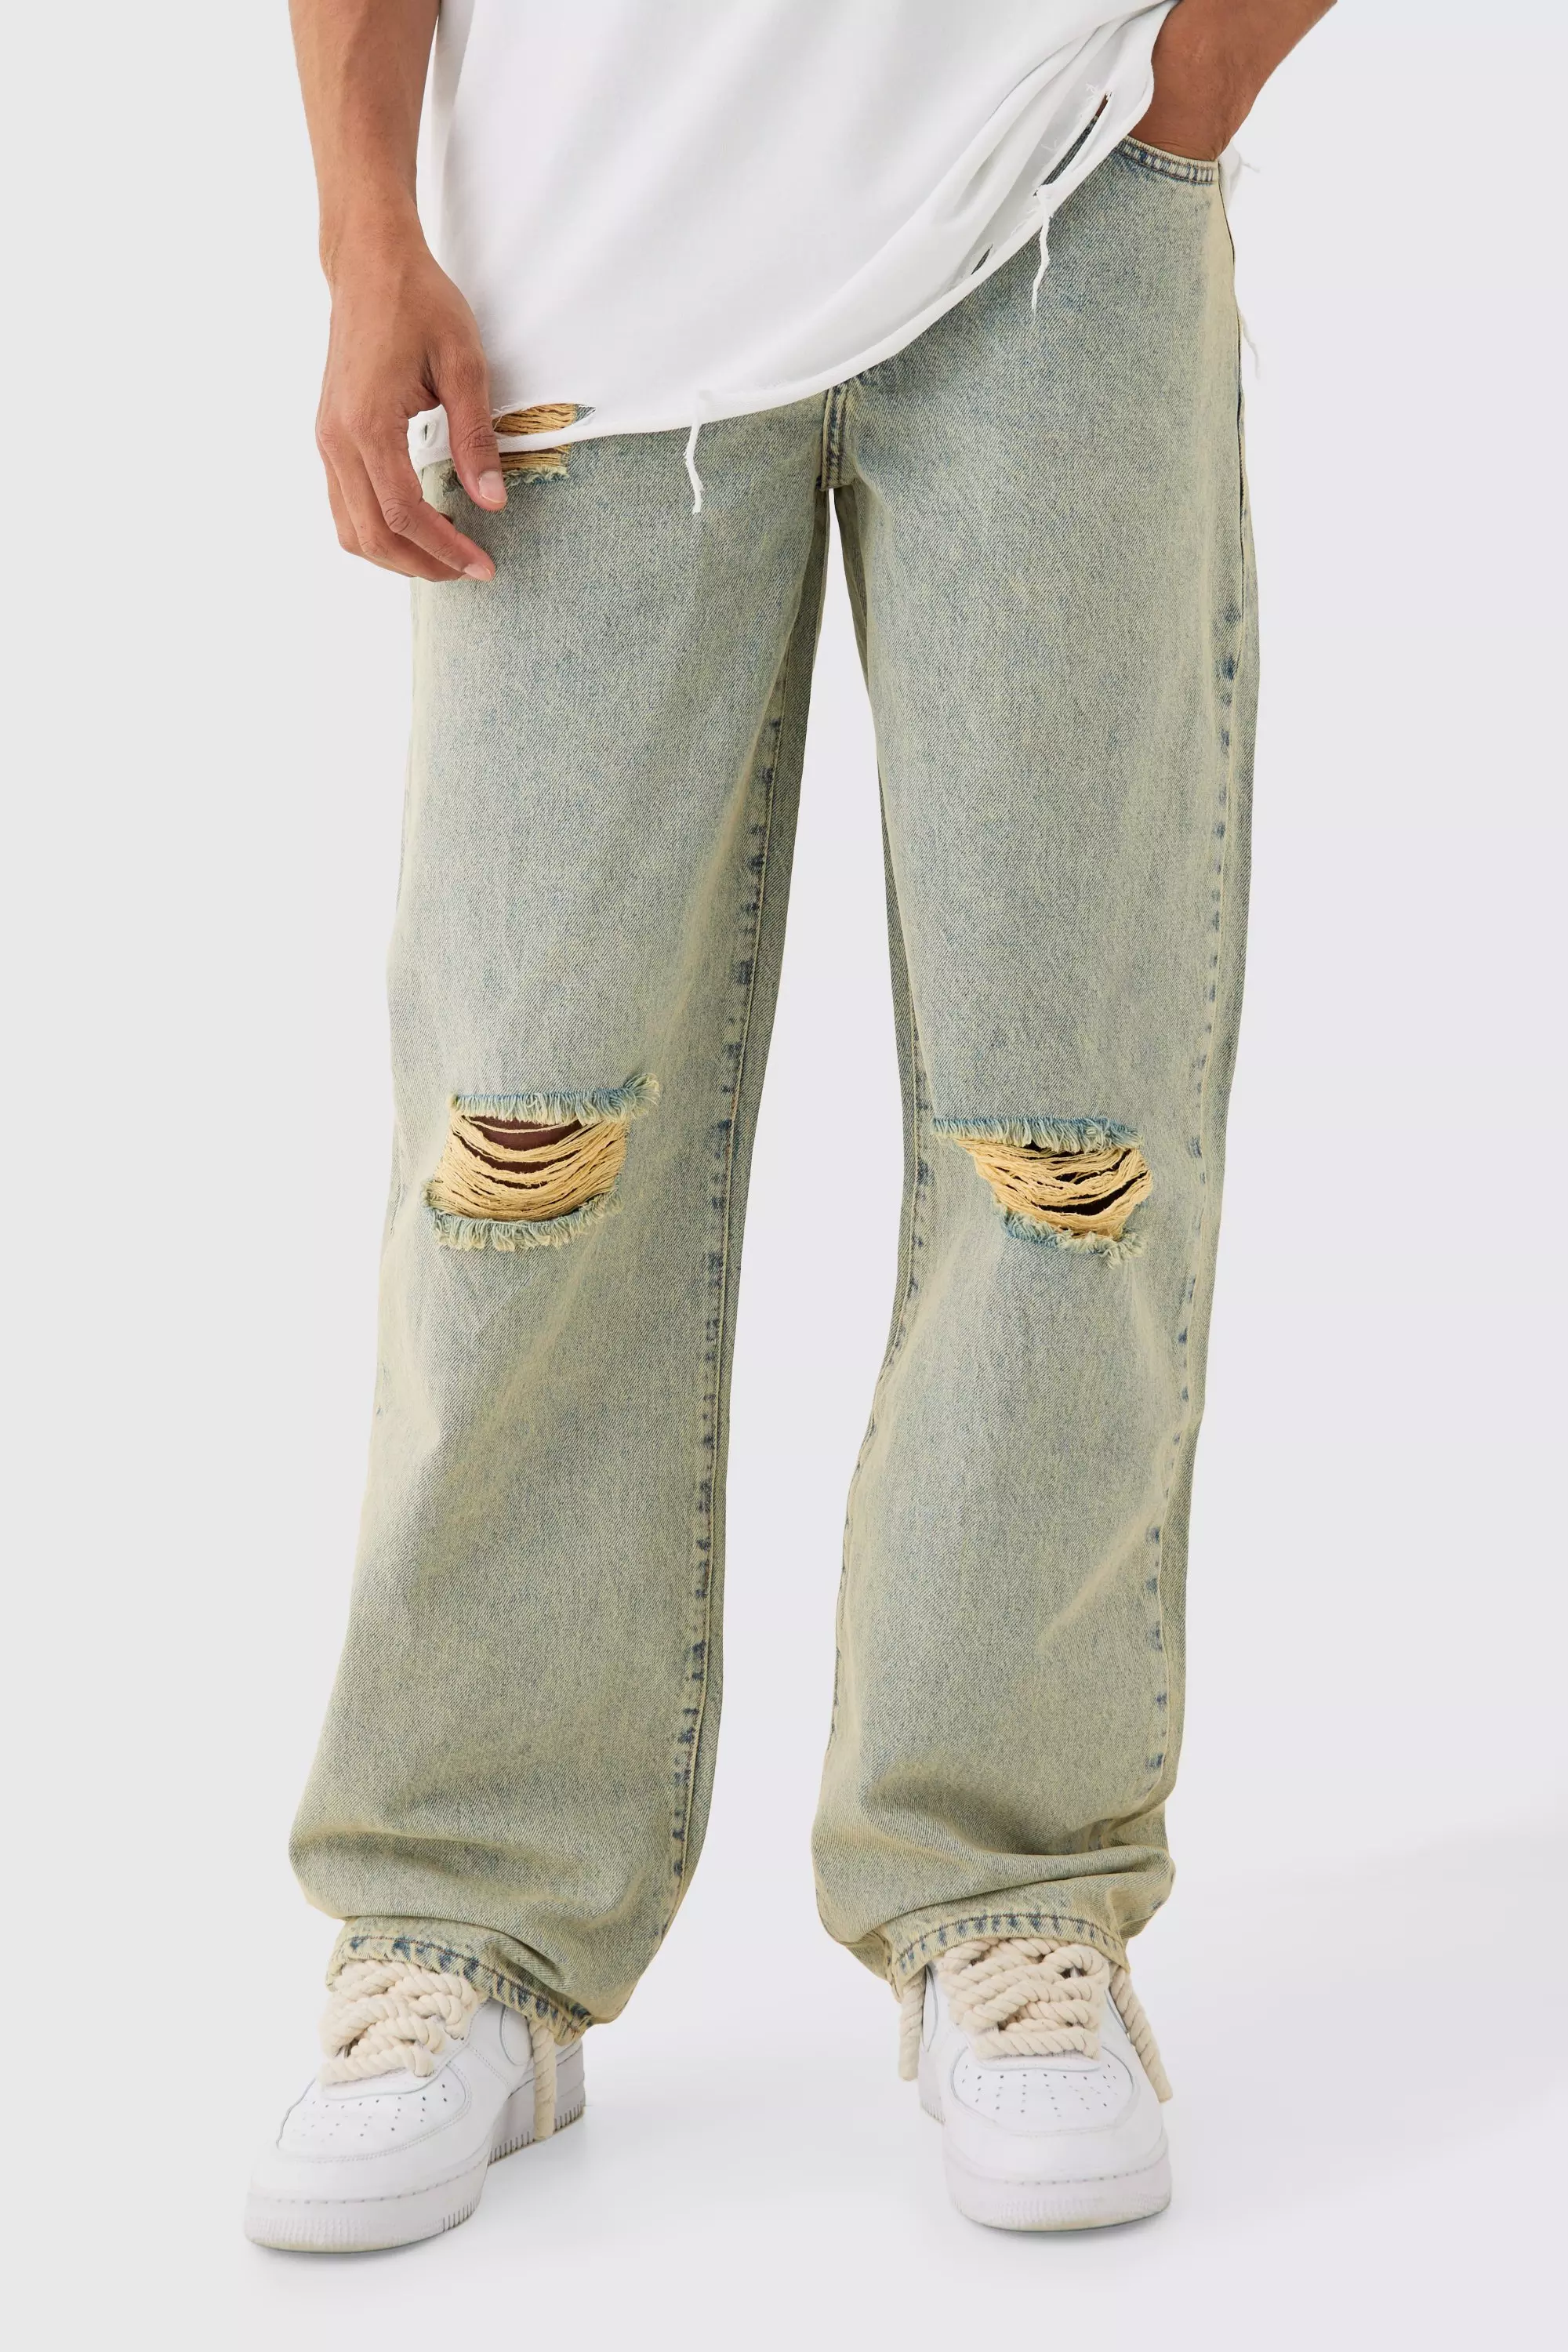 Green Baggy Rigid Green Tint Ripped Knee Jeans